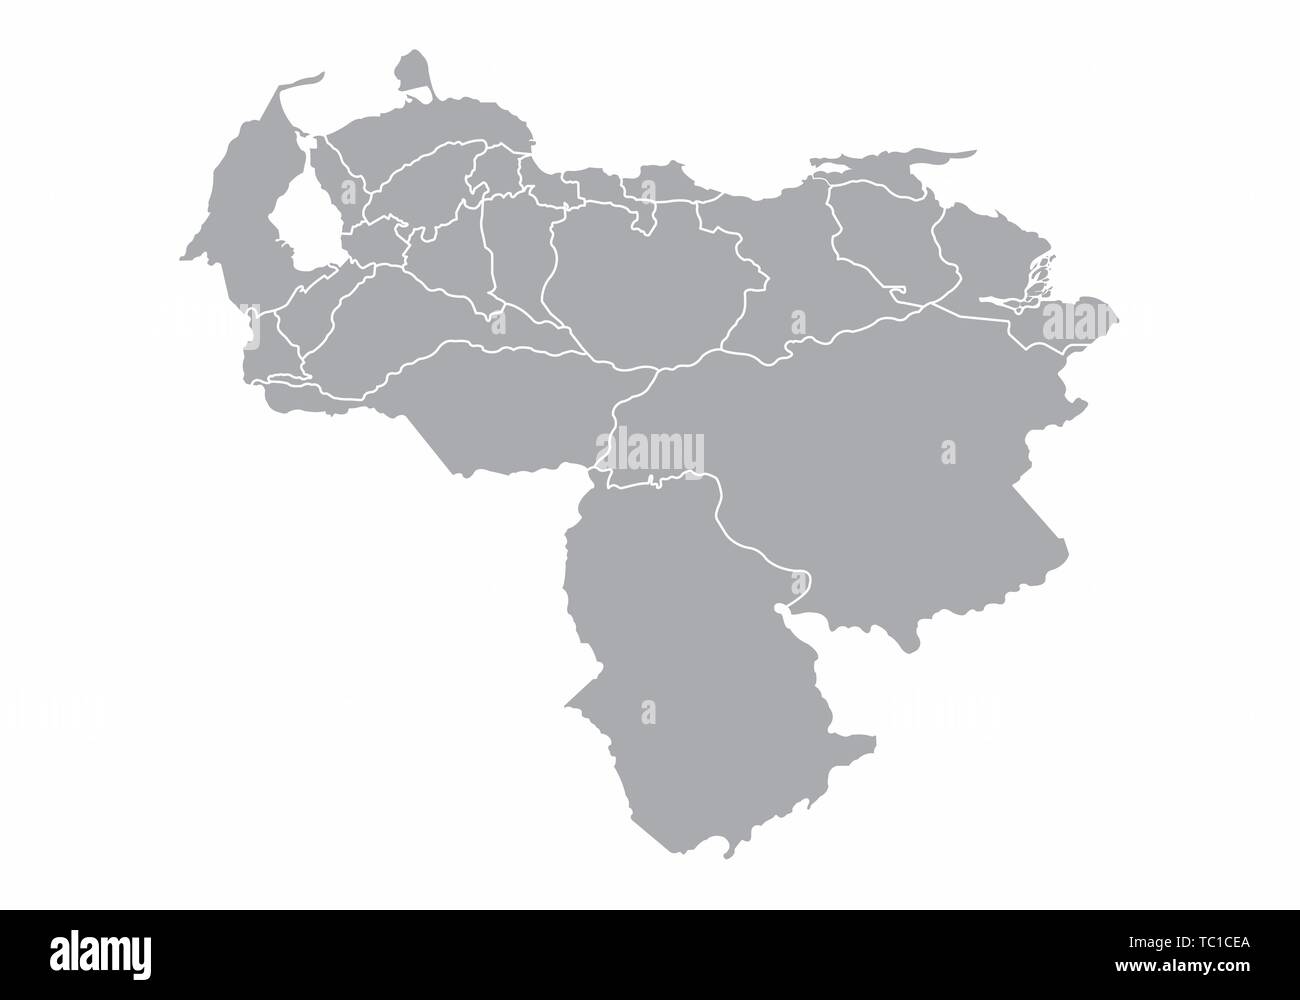 A gray map of Venezuela divided into provinces Stock Vector